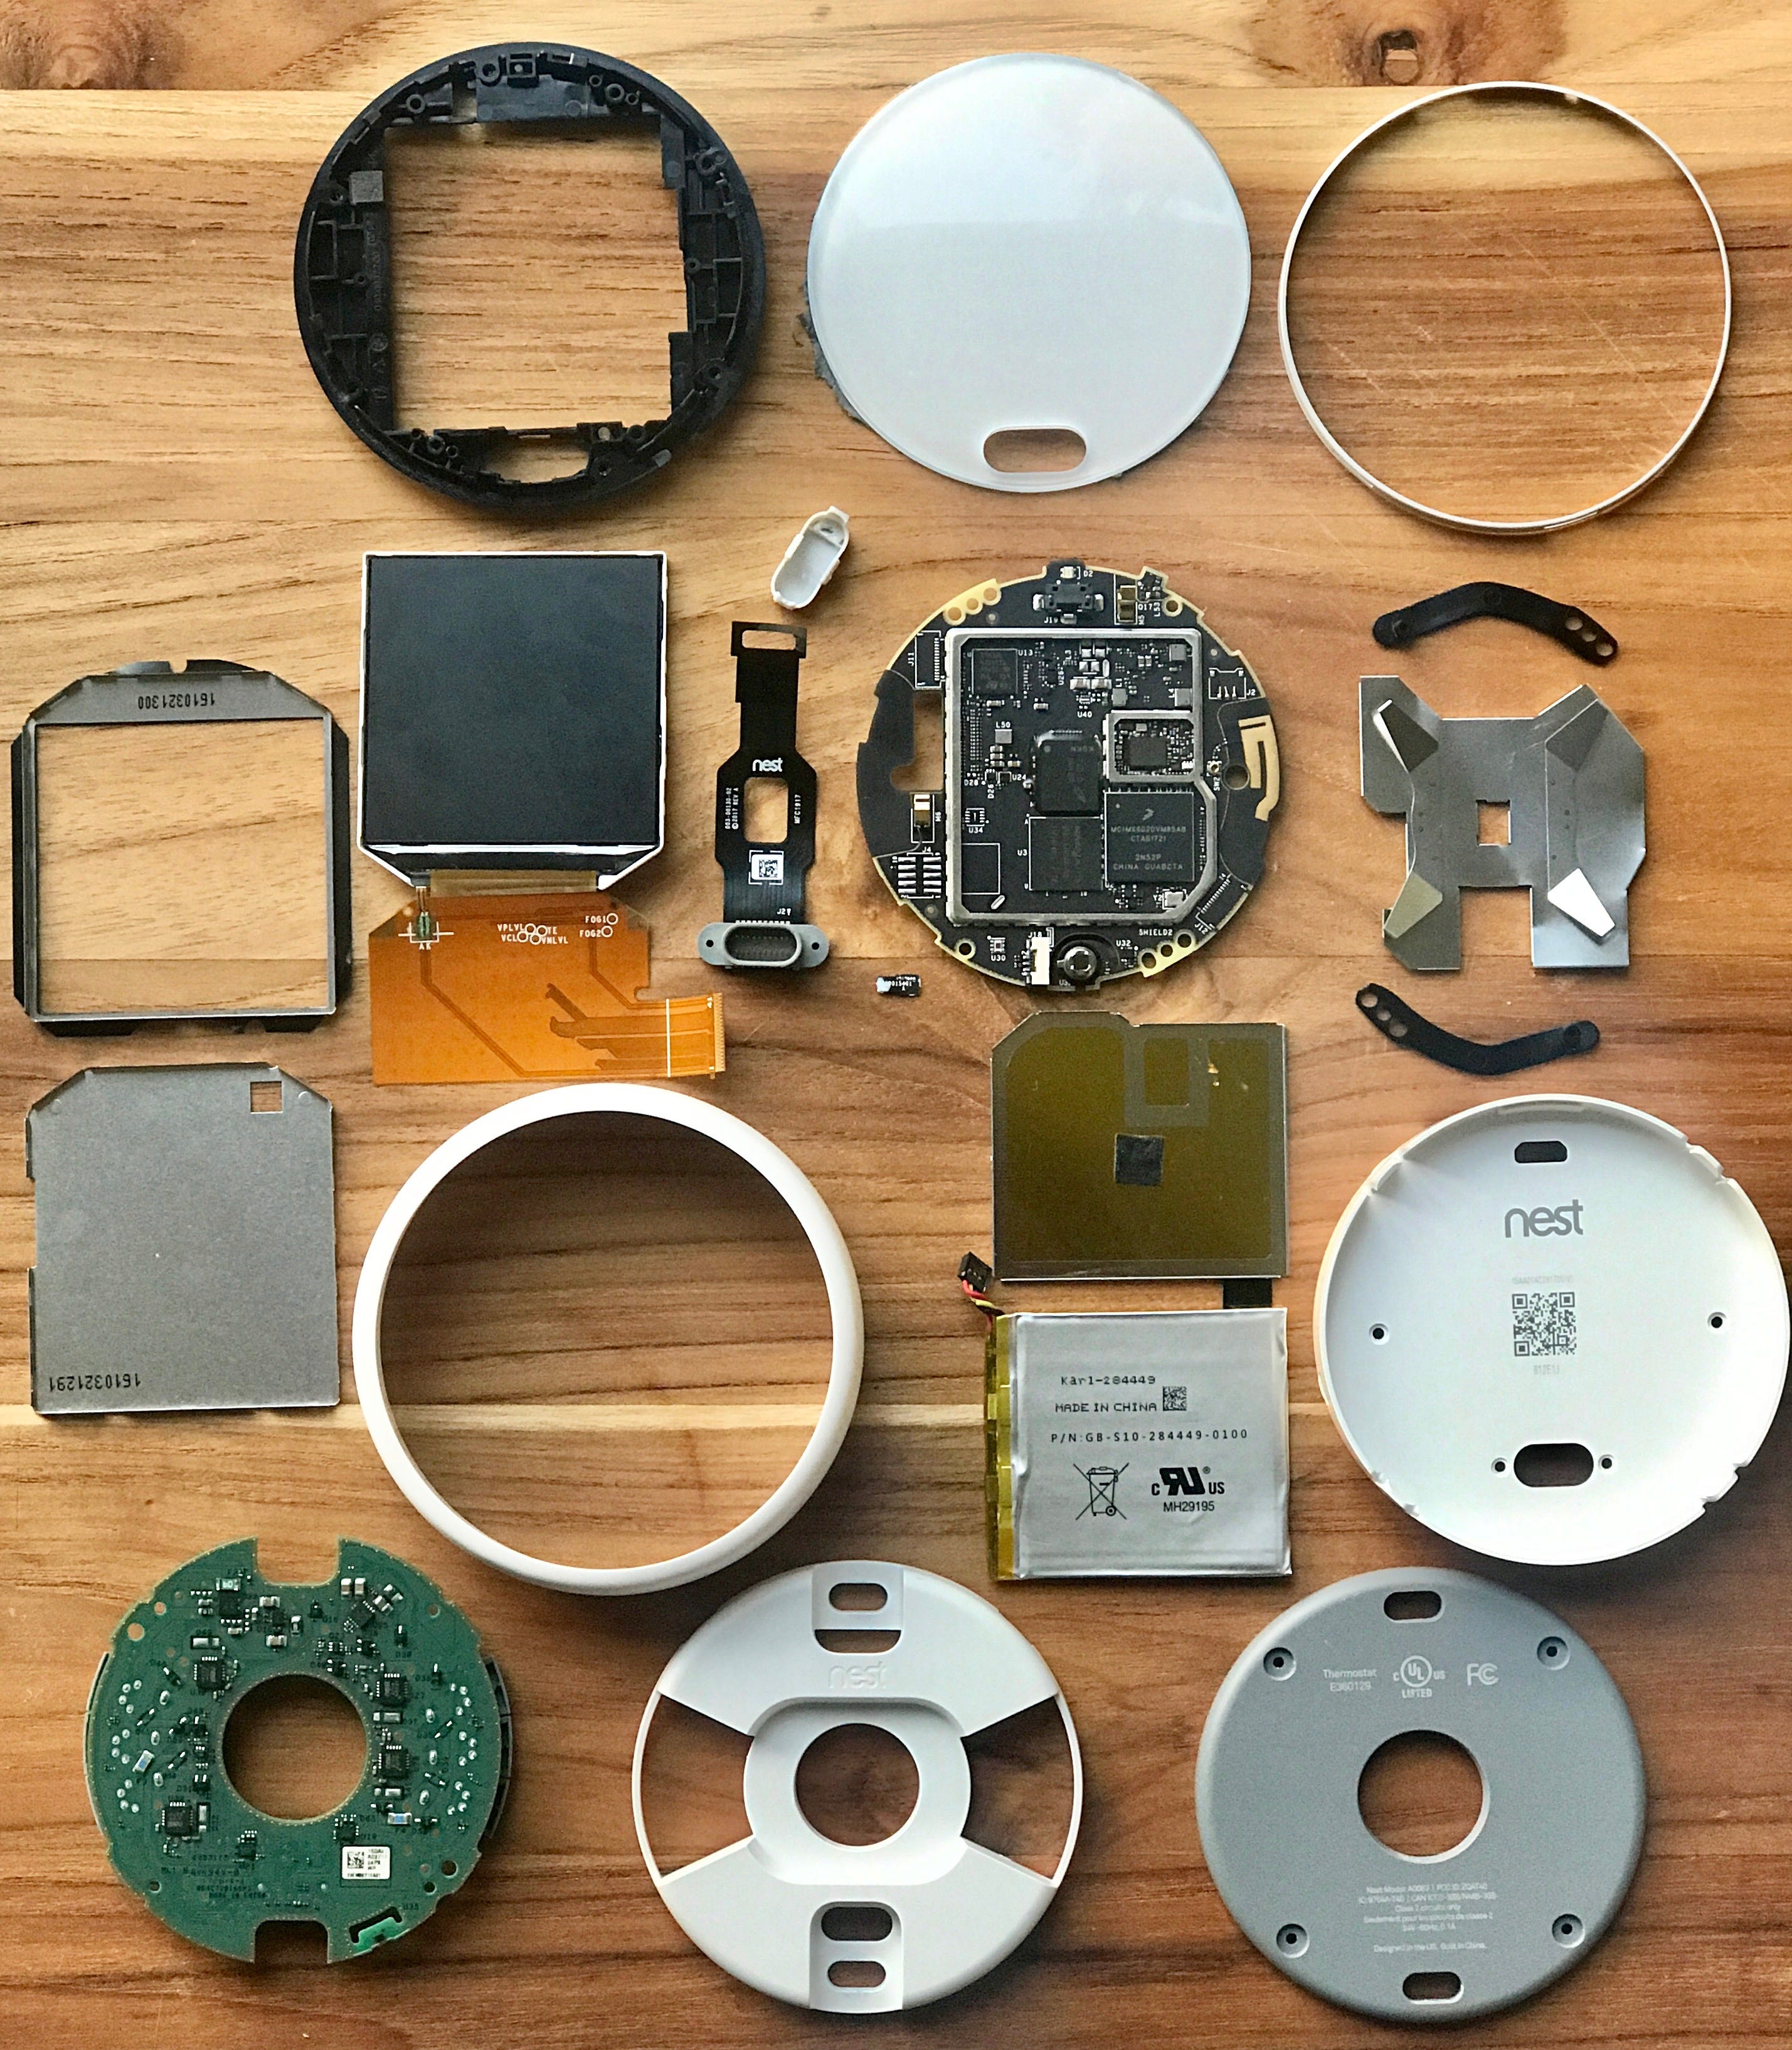 Nest Thermostat E teardown, and on making beautiful devices for the home, by Justin Alvey